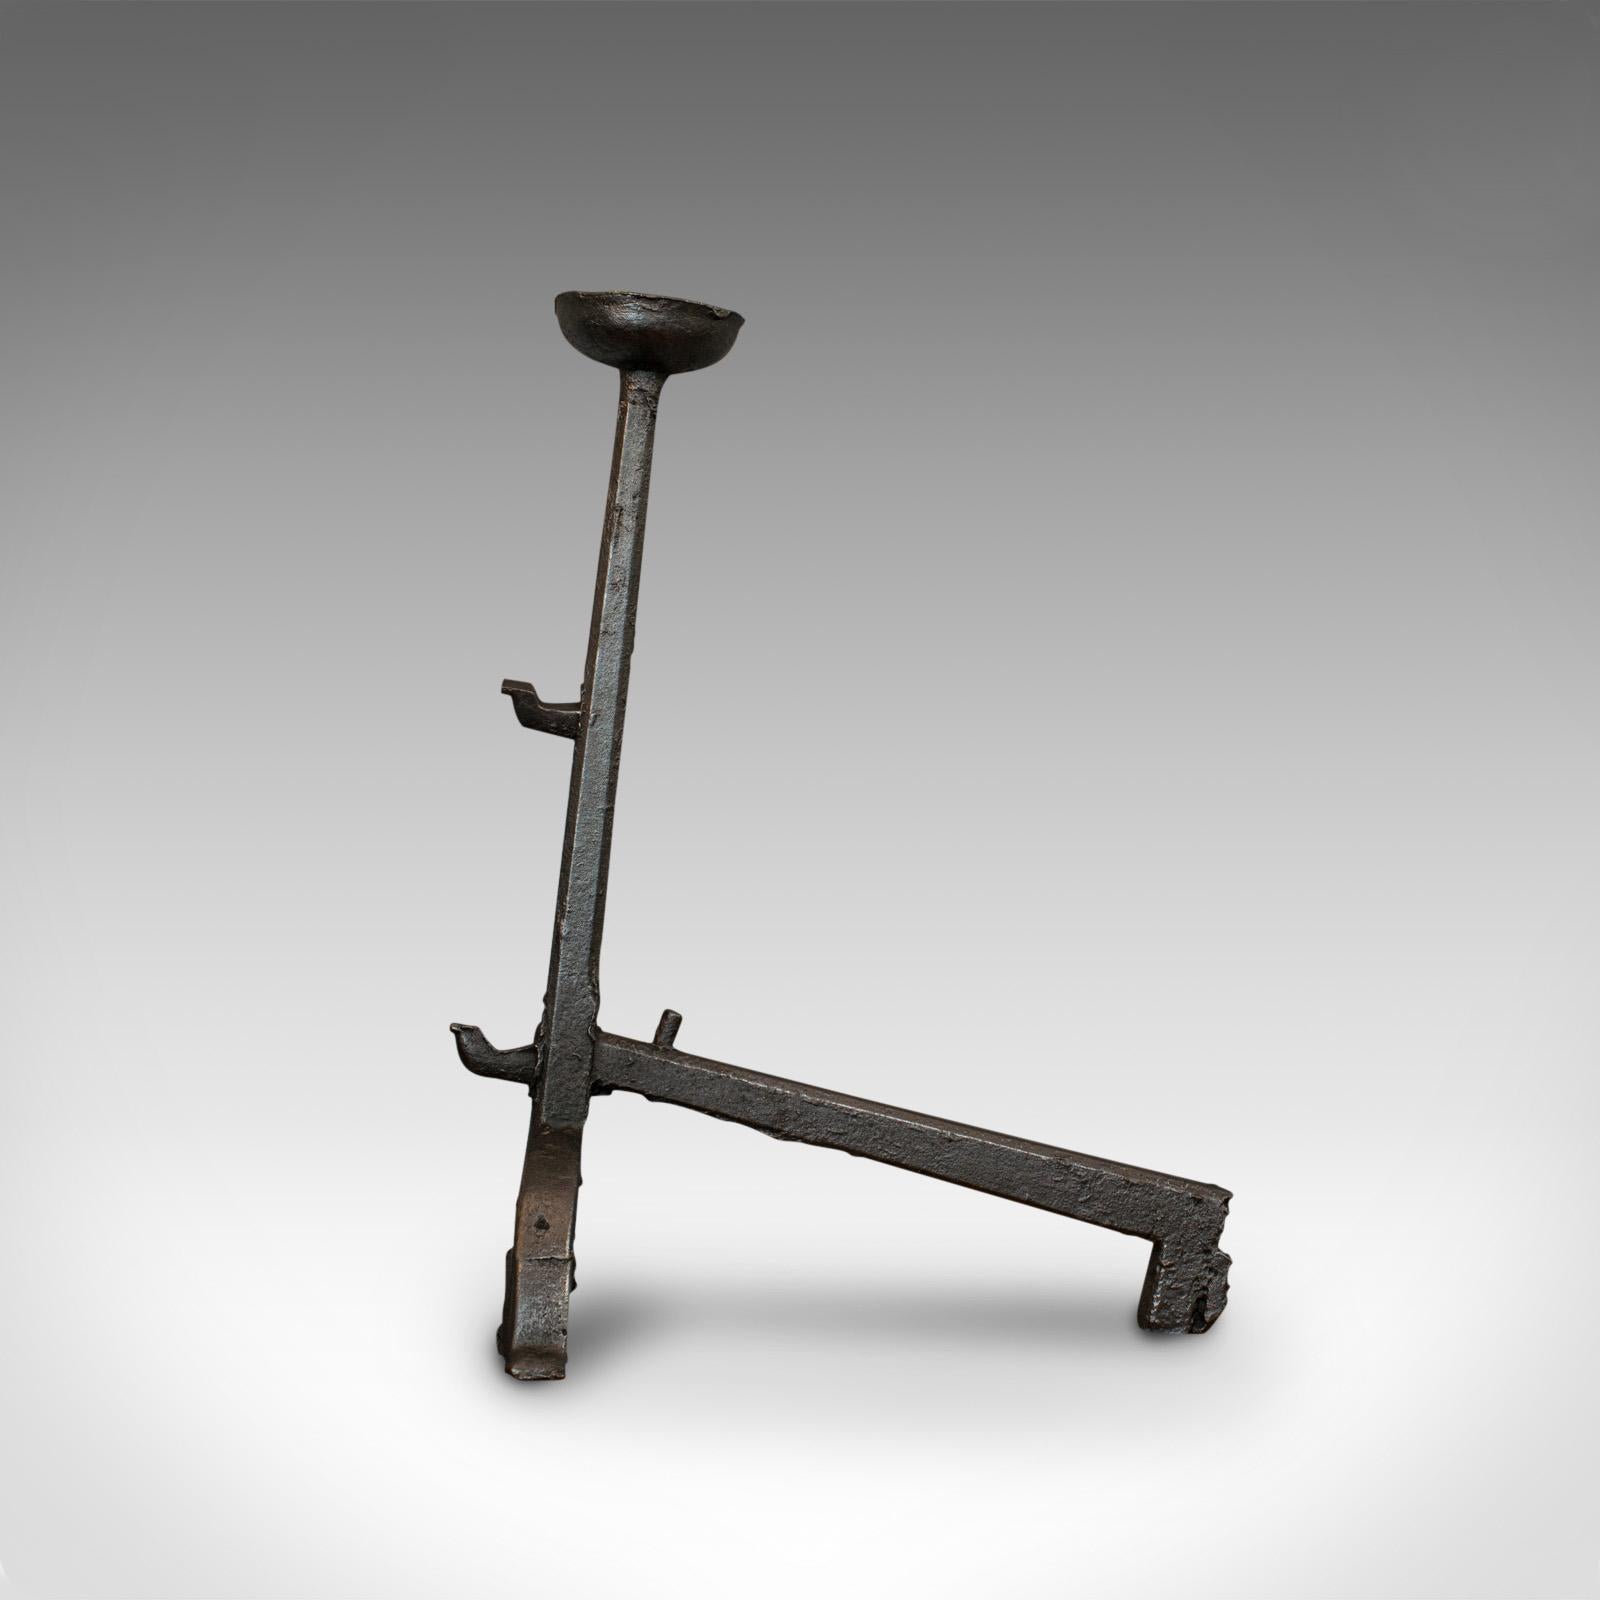 18th Century Large, Antique Decorative Andiron, Iron, Fireside, Firedog, Candle, Georgian For Sale